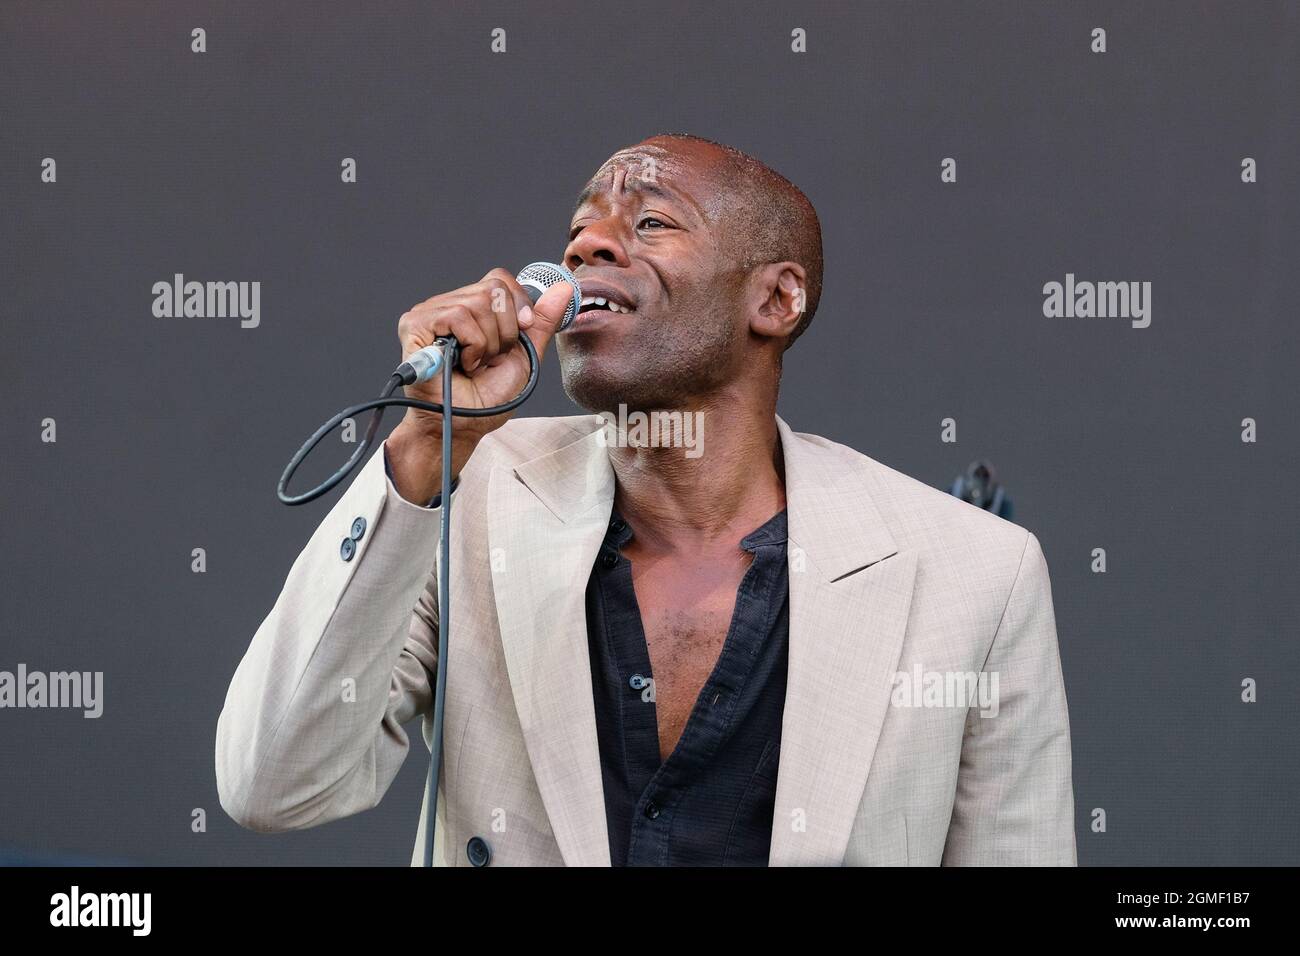 Newport, UK. 18th Sep, 2021. Andrew Roachford, MBE, British singer  songwriter and keyboard player with the pop, rock and soul band Roachwood  performing live on stage at the Isle of Wight Festival. (